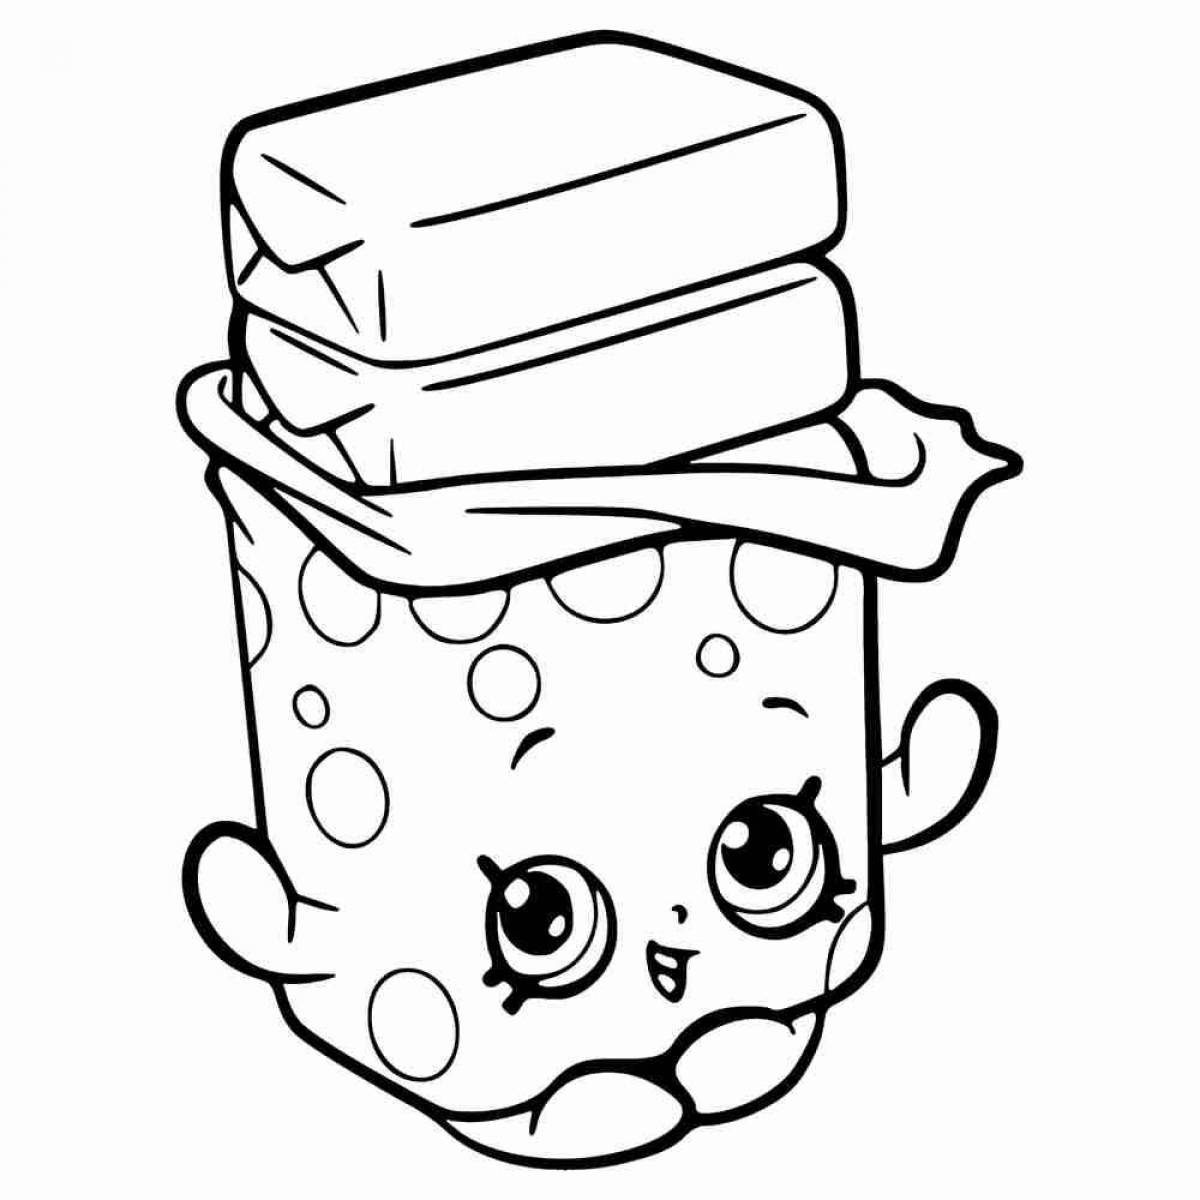 Shopkins awesome coloring pages